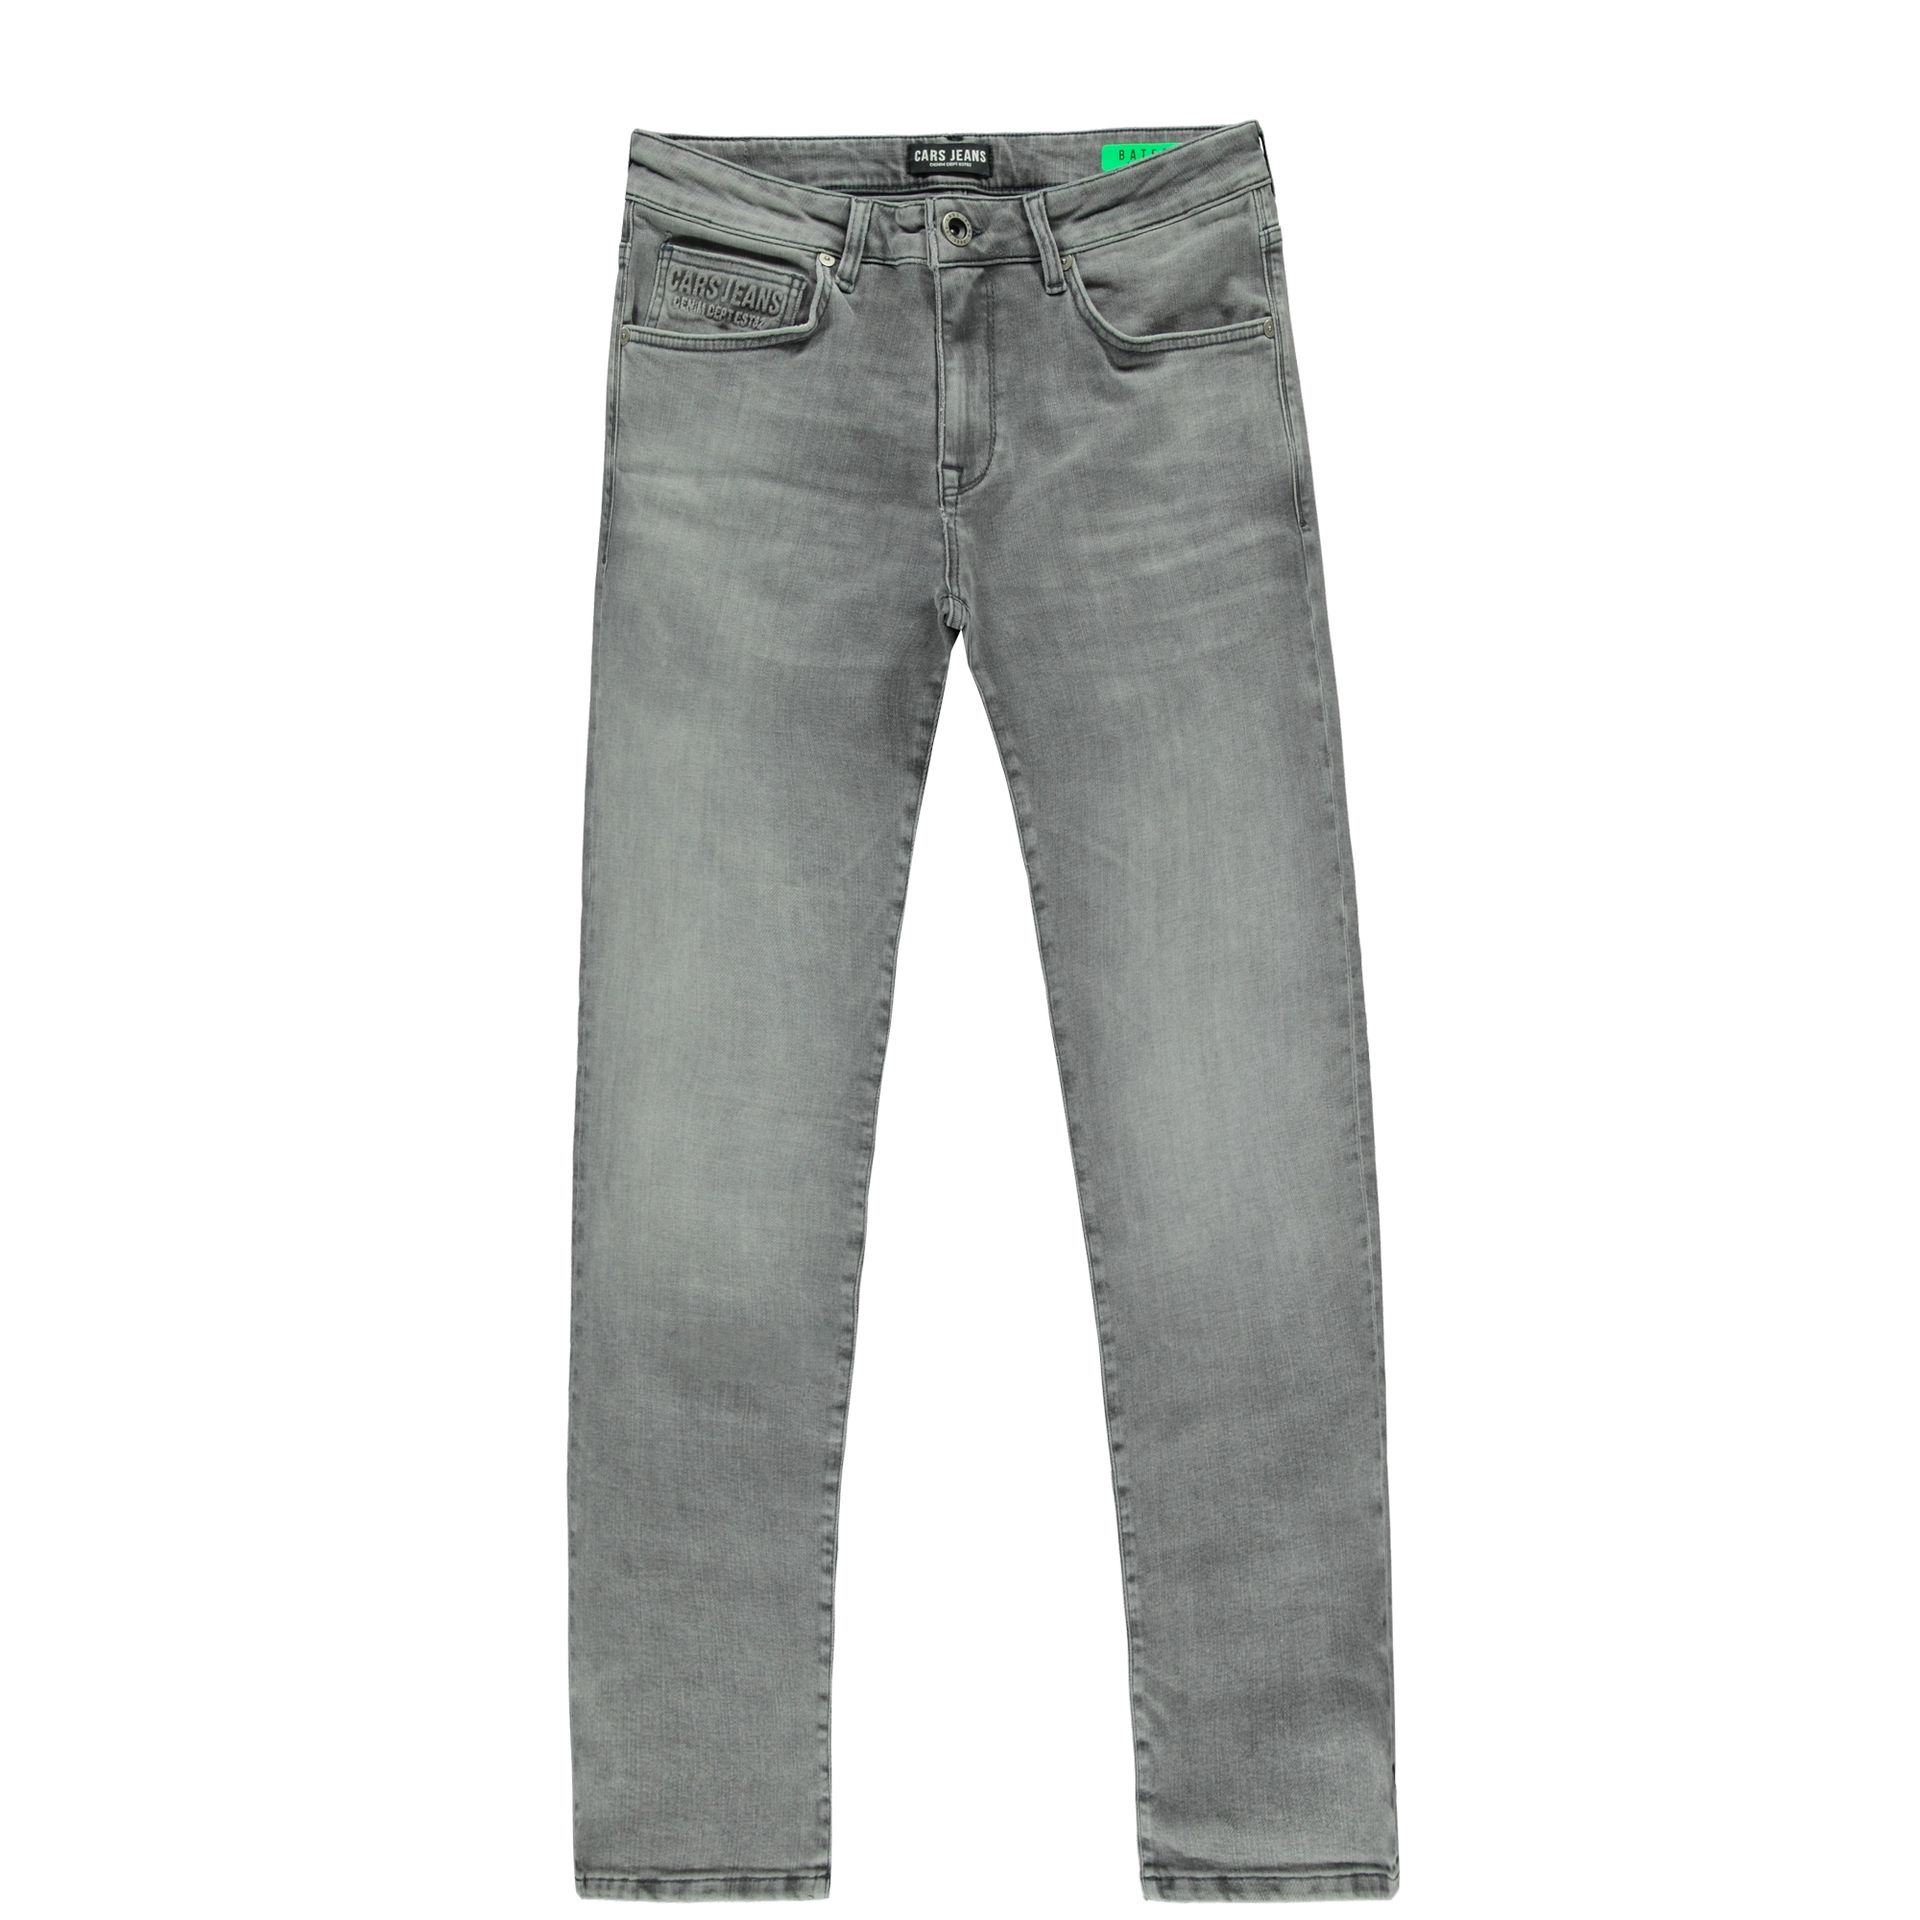 Cars jeans Jeans Bates Slim fit 13 grey used 2900147112544